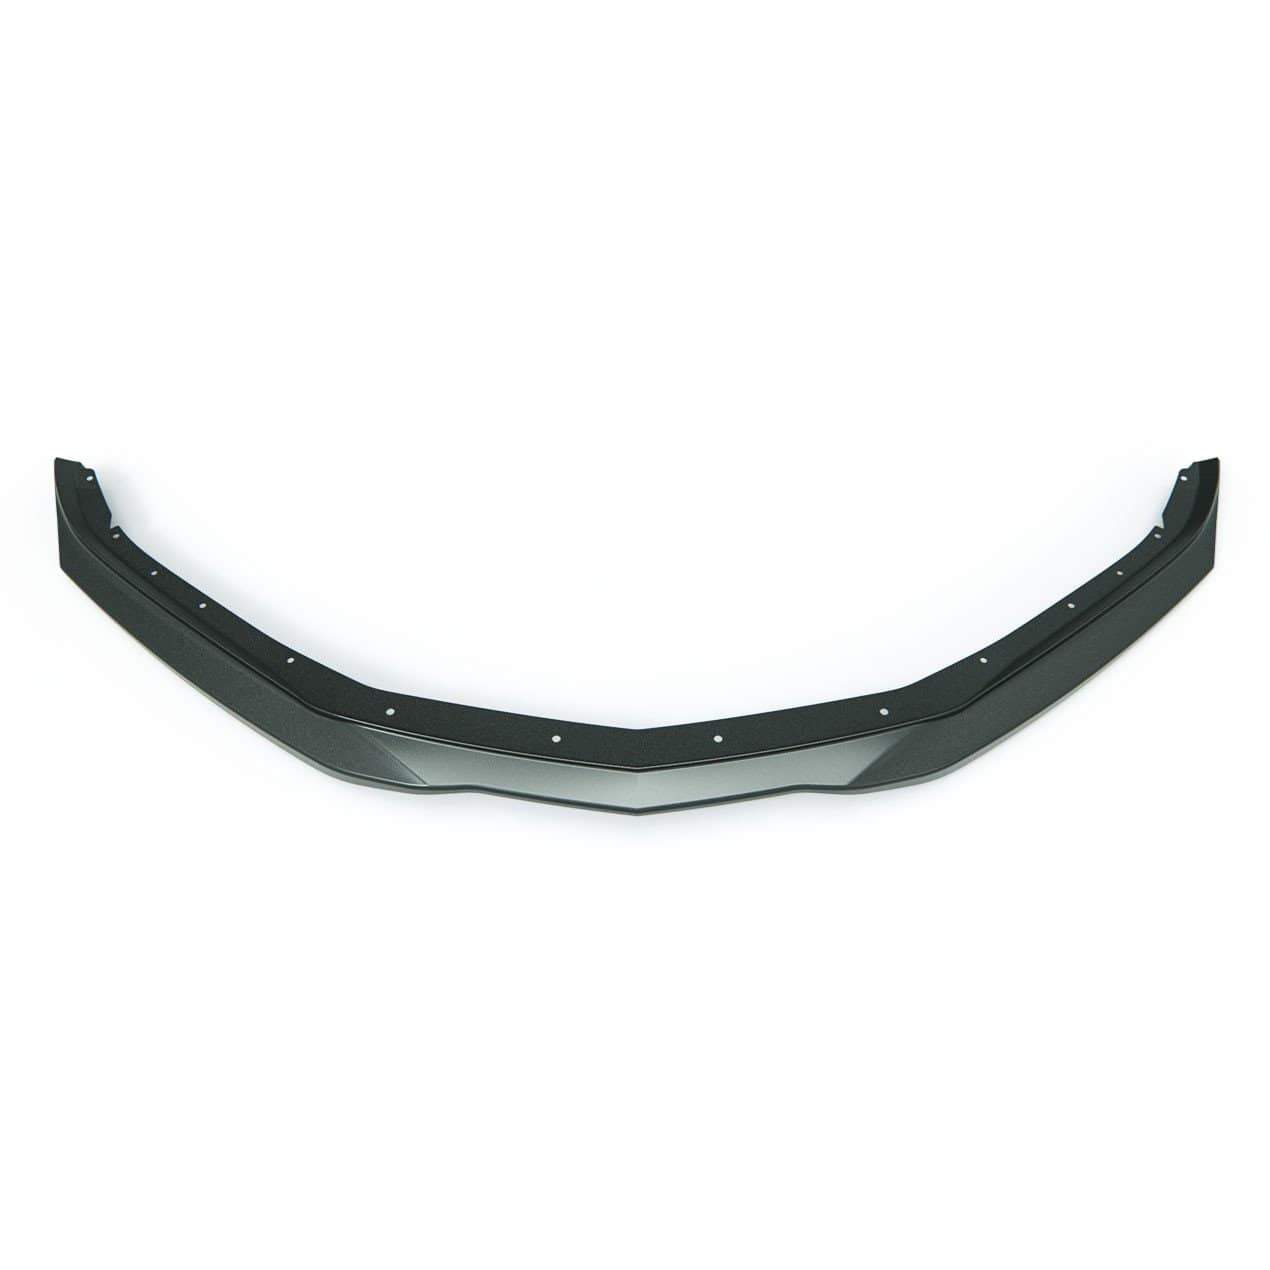 ACS Composite T6 Front Splitter for Camaro SS 2016-2018 [48-4-001]GBA in Primer without Endcaps - Enhance aerodynamic performance and control.